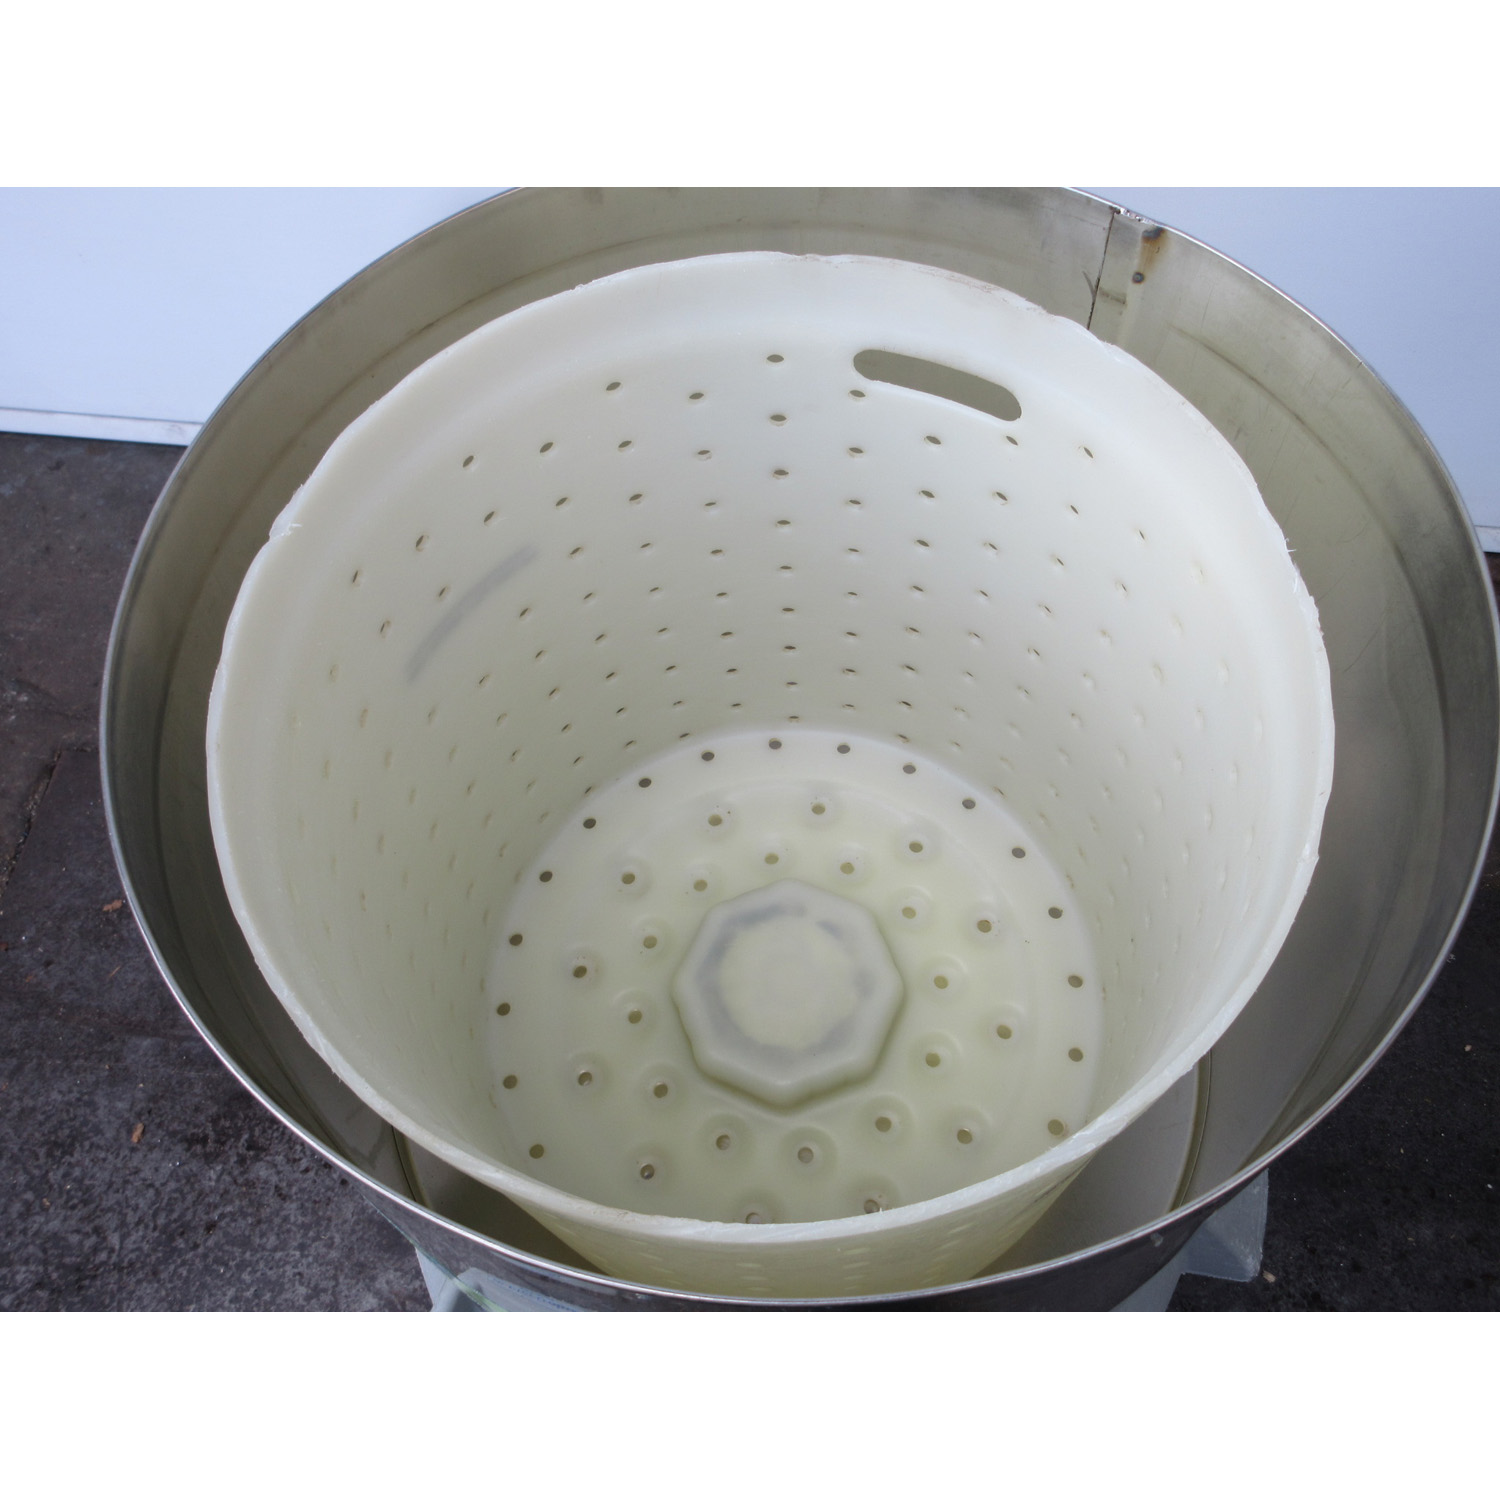 Electrolux VP1 Salad Spinner Dryer, Used Great Condition General